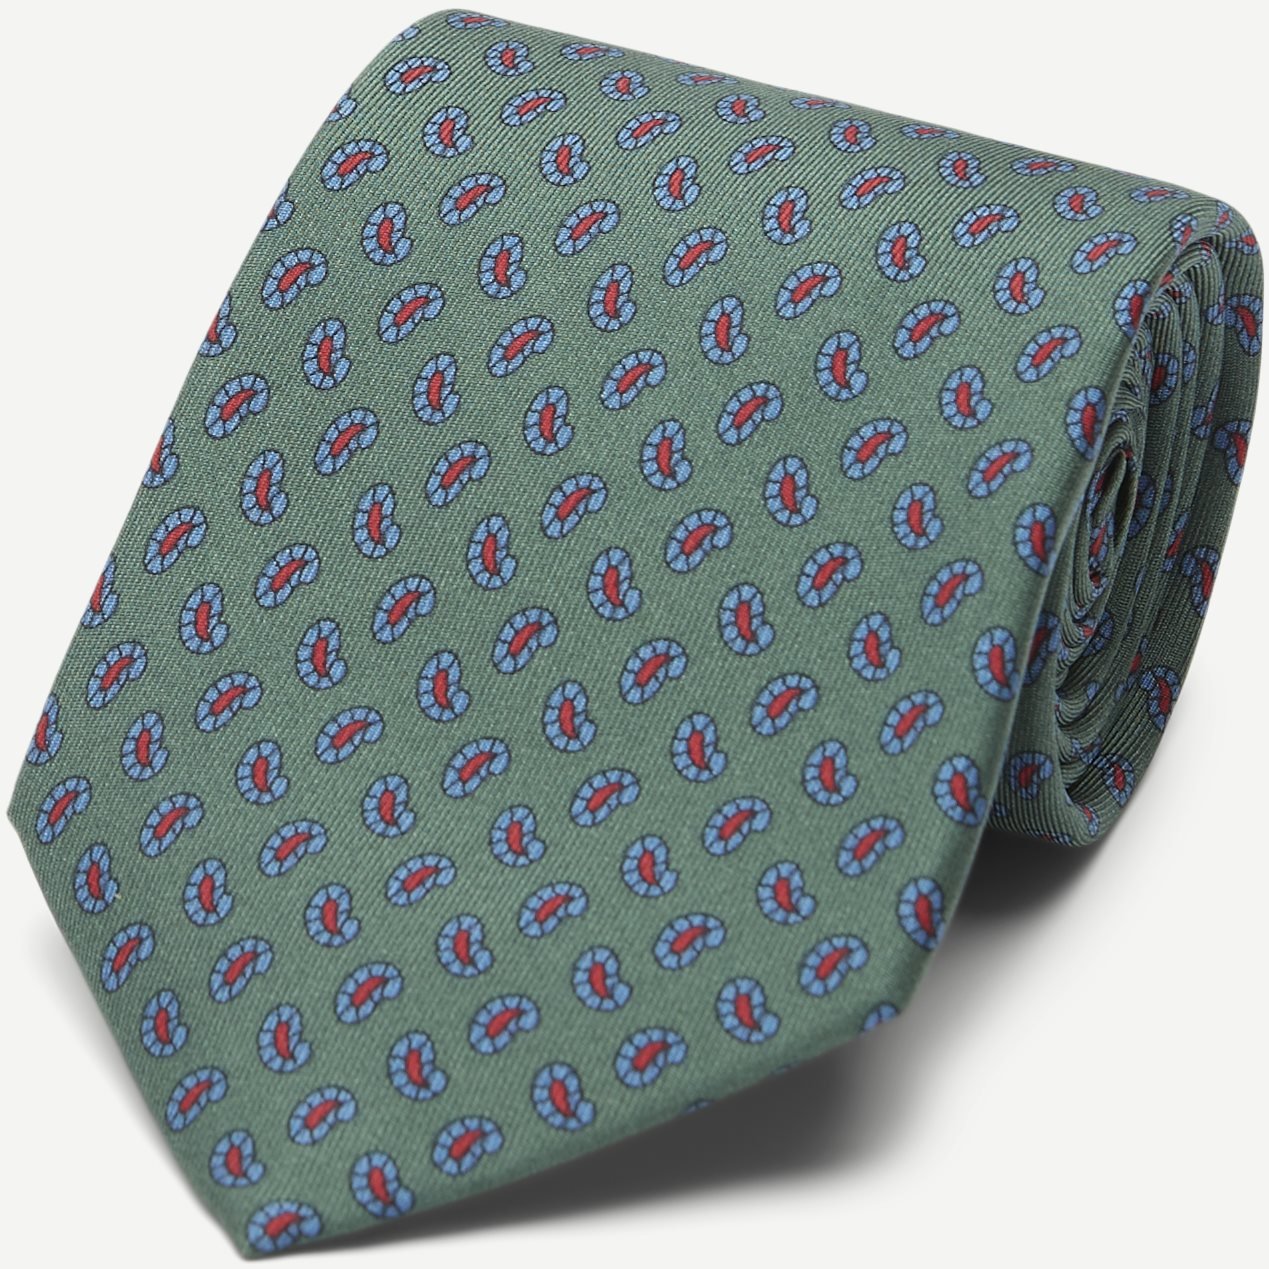 The Green Printed Counselor Tie 8 cm - Slips - Grøn